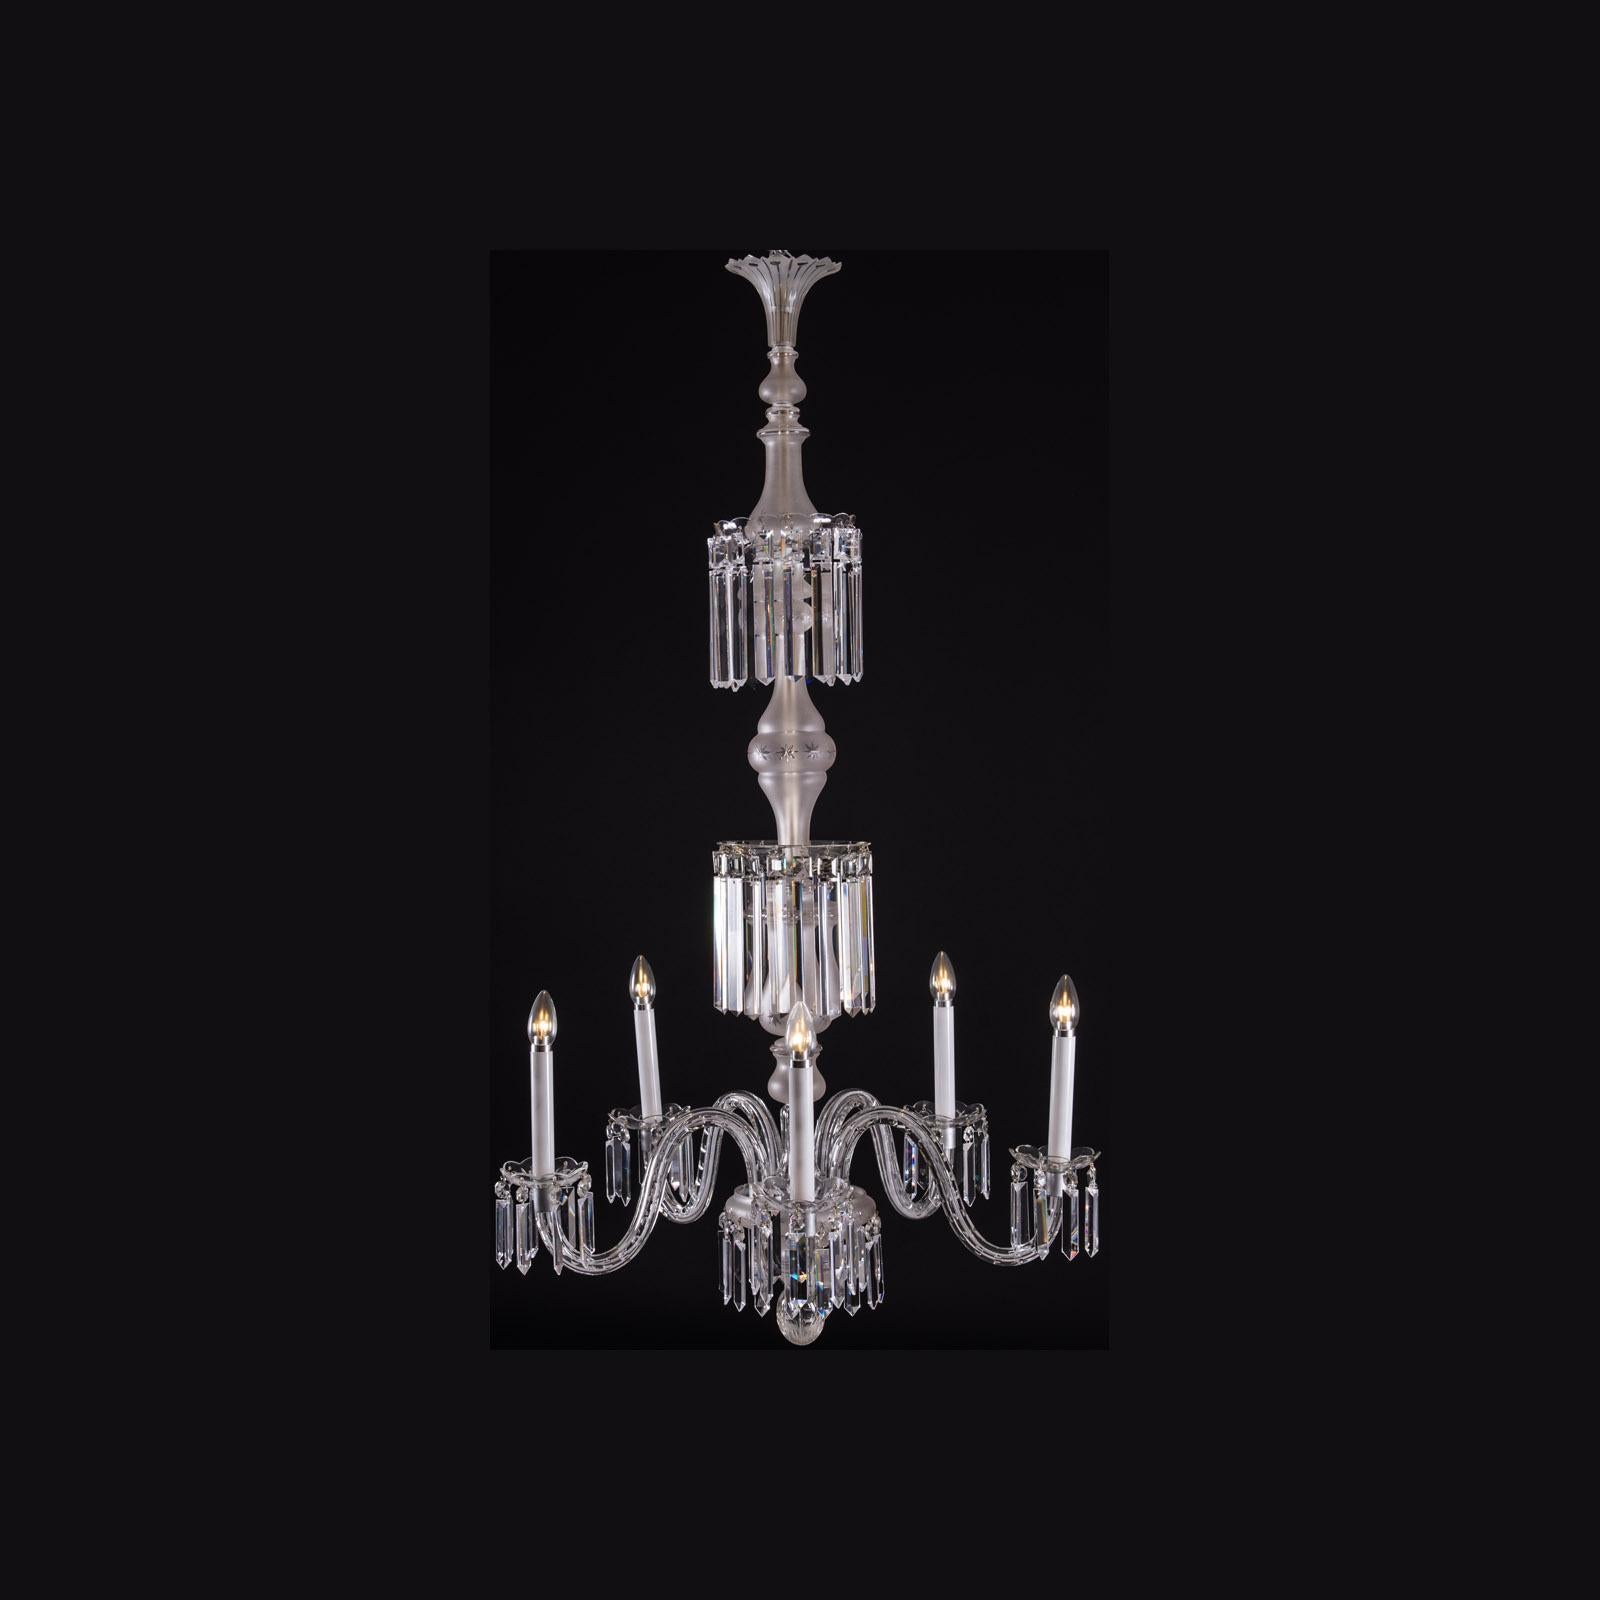 A wonderful, Mid-Century Modern -slim and elegant glass-chandelier with five arms plus one wall lamp.